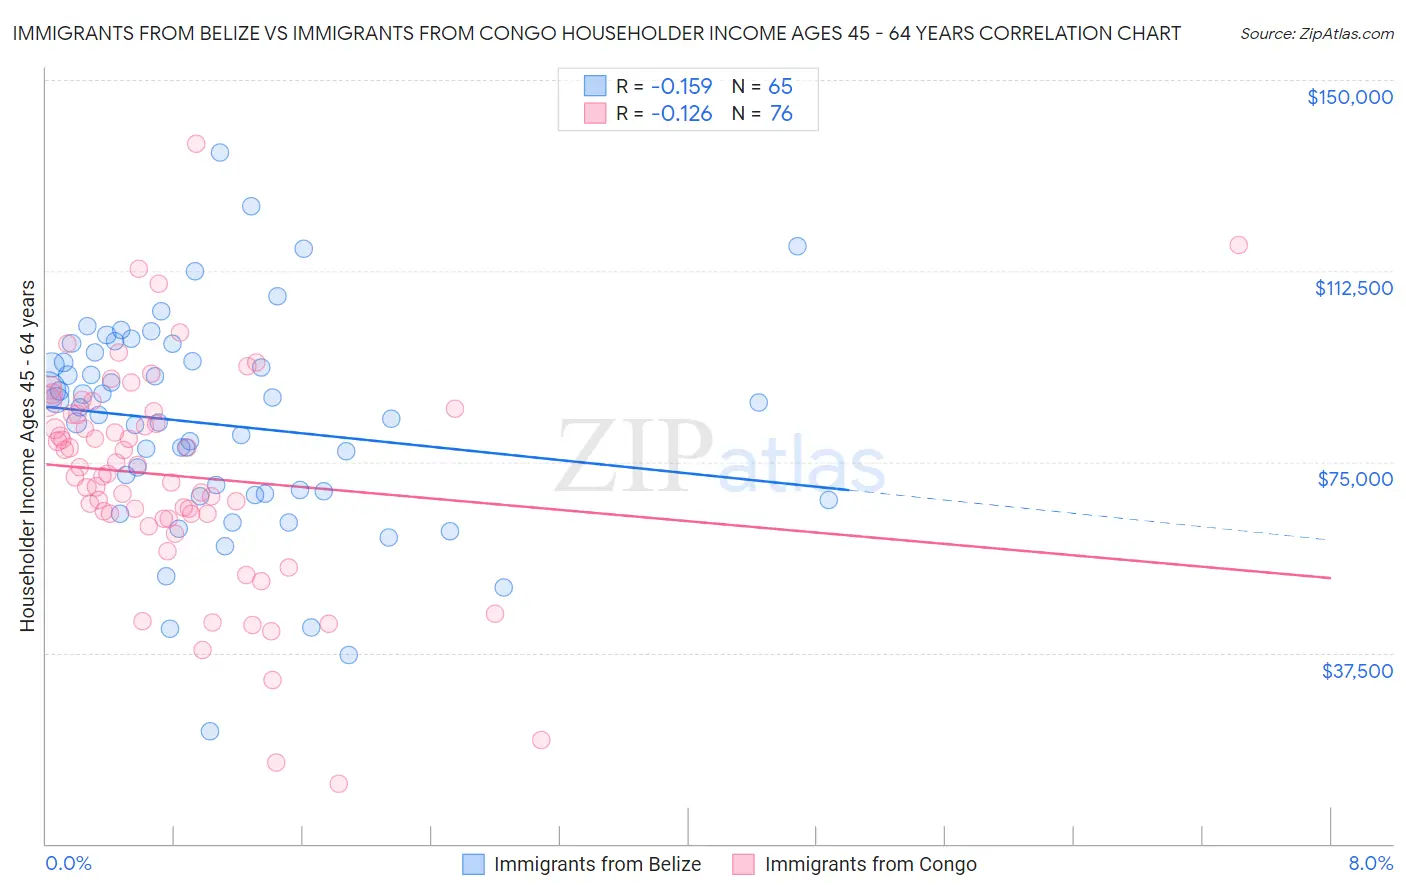 Immigrants from Belize vs Immigrants from Congo Householder Income Ages 45 - 64 years